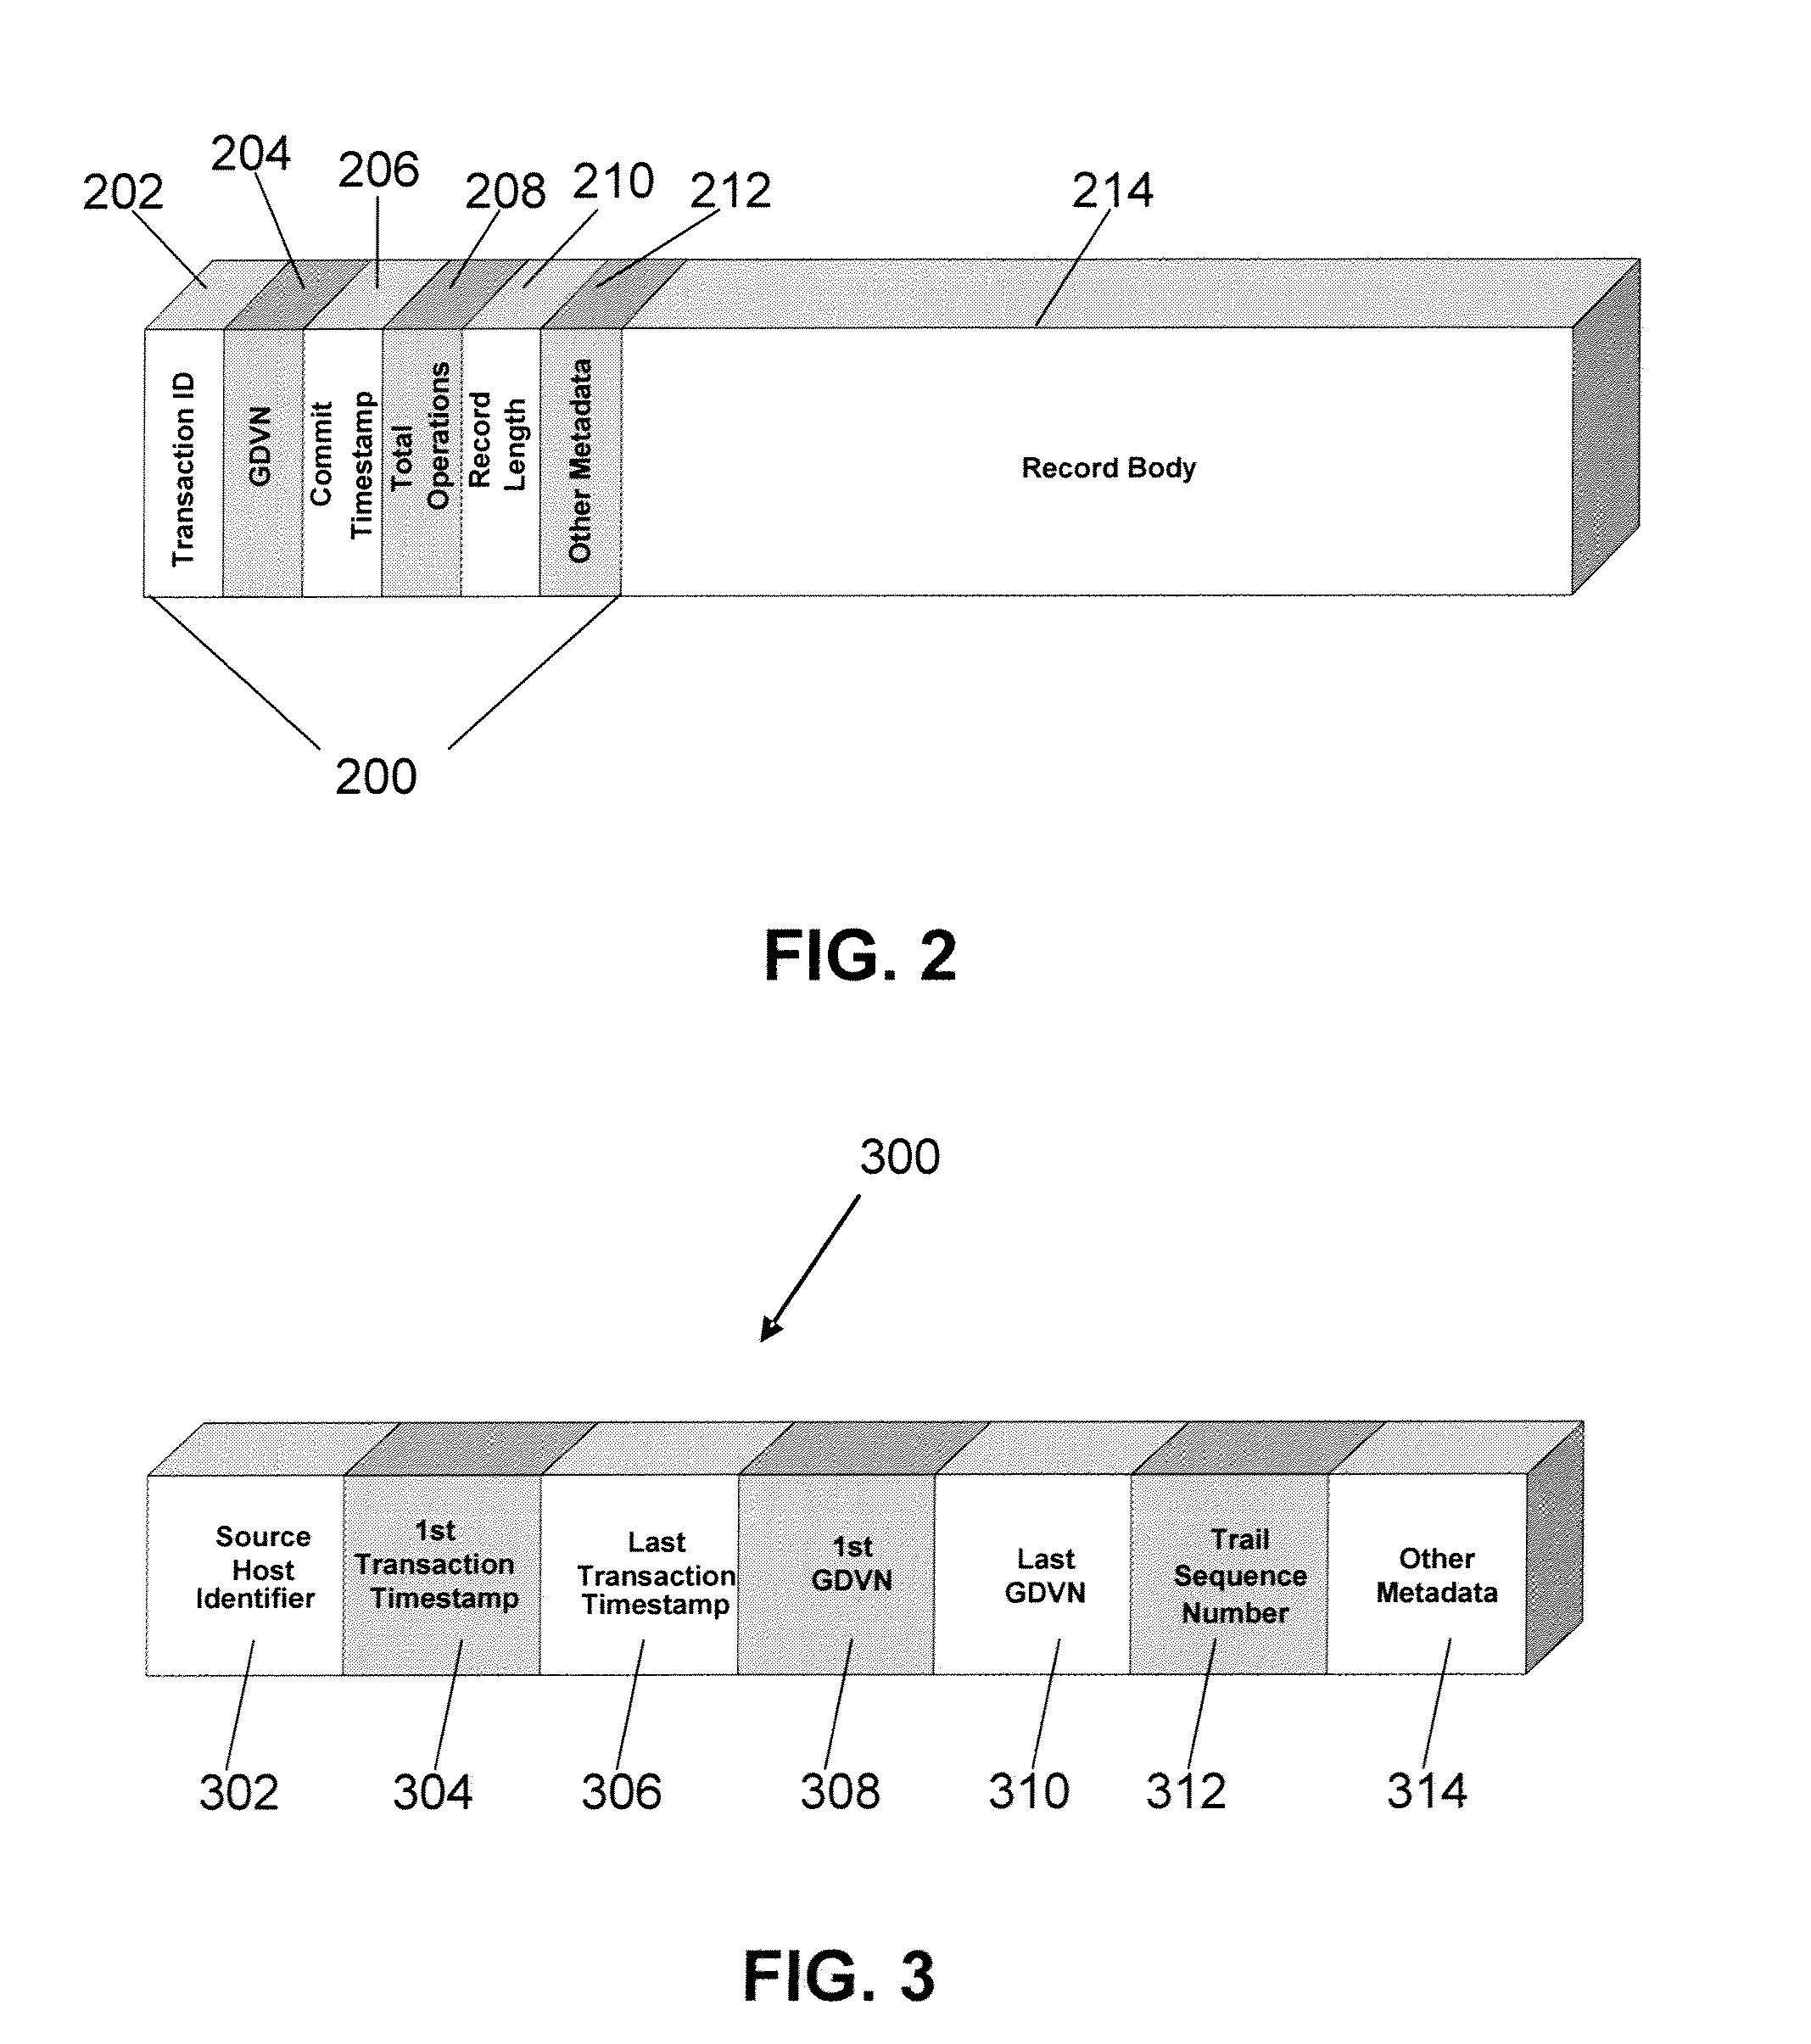 Apparatus and method for forming a homogenous transaction data store from heterogeneous sources